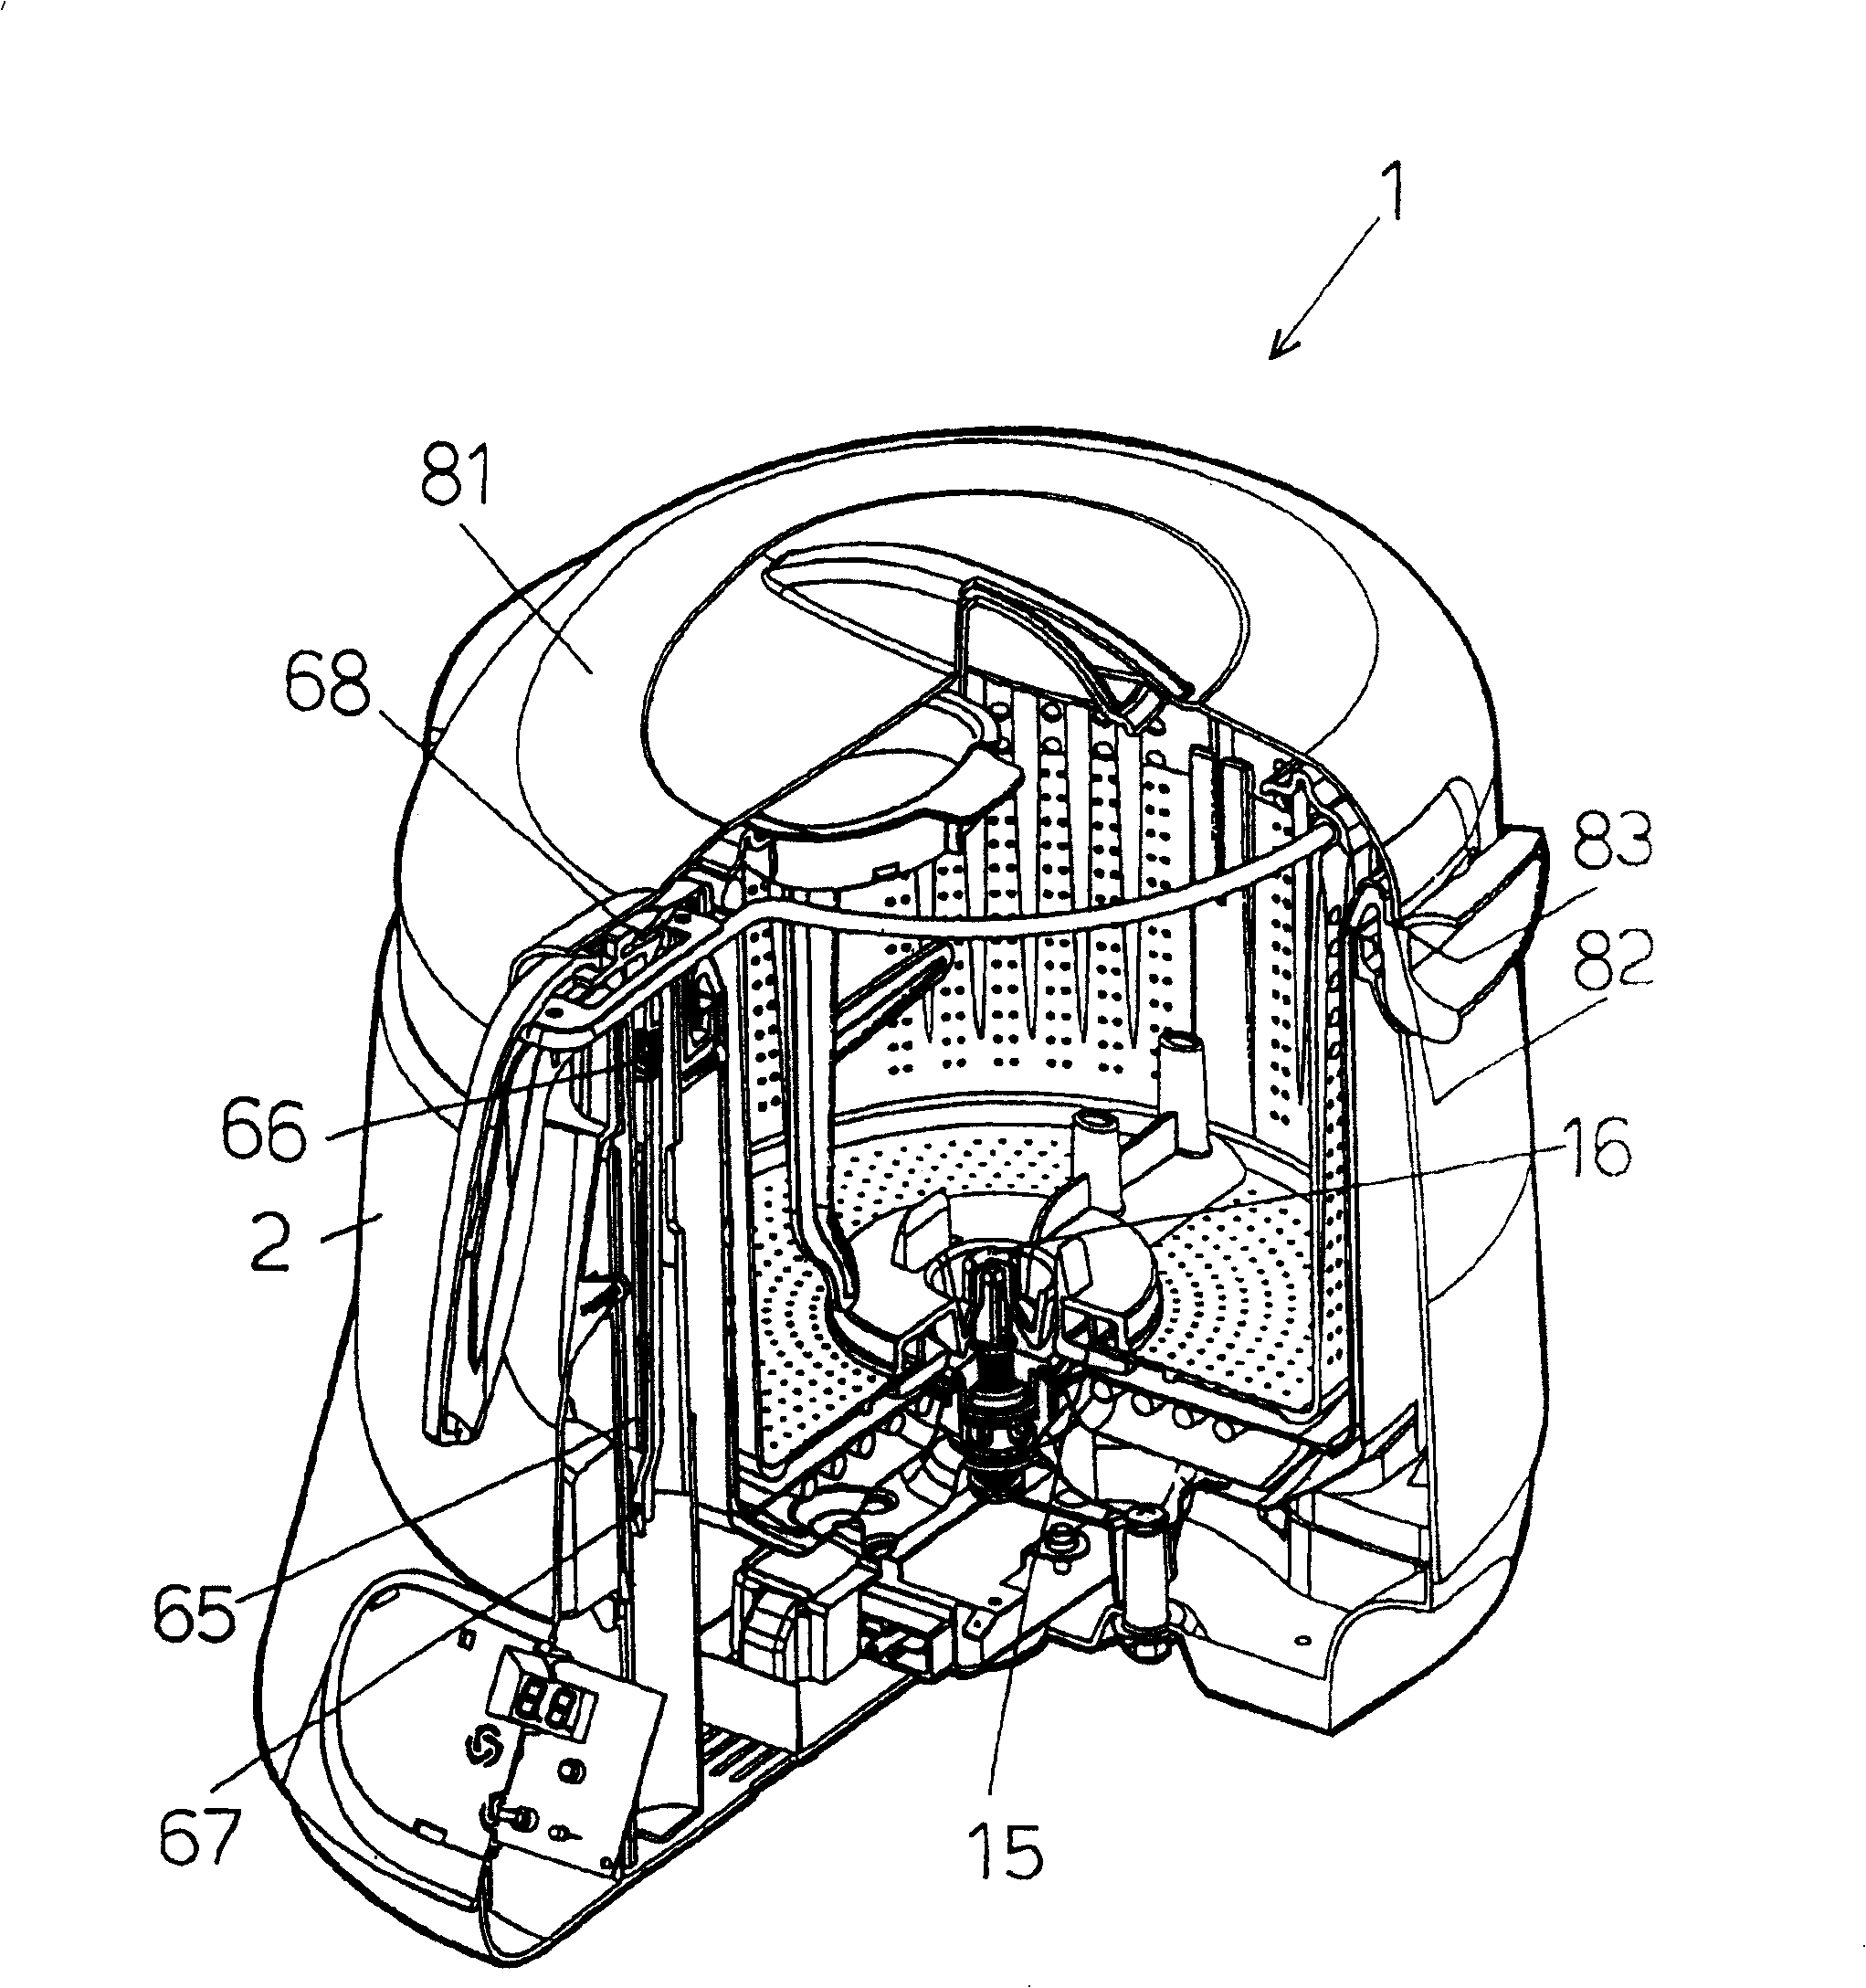 Cooking device and method